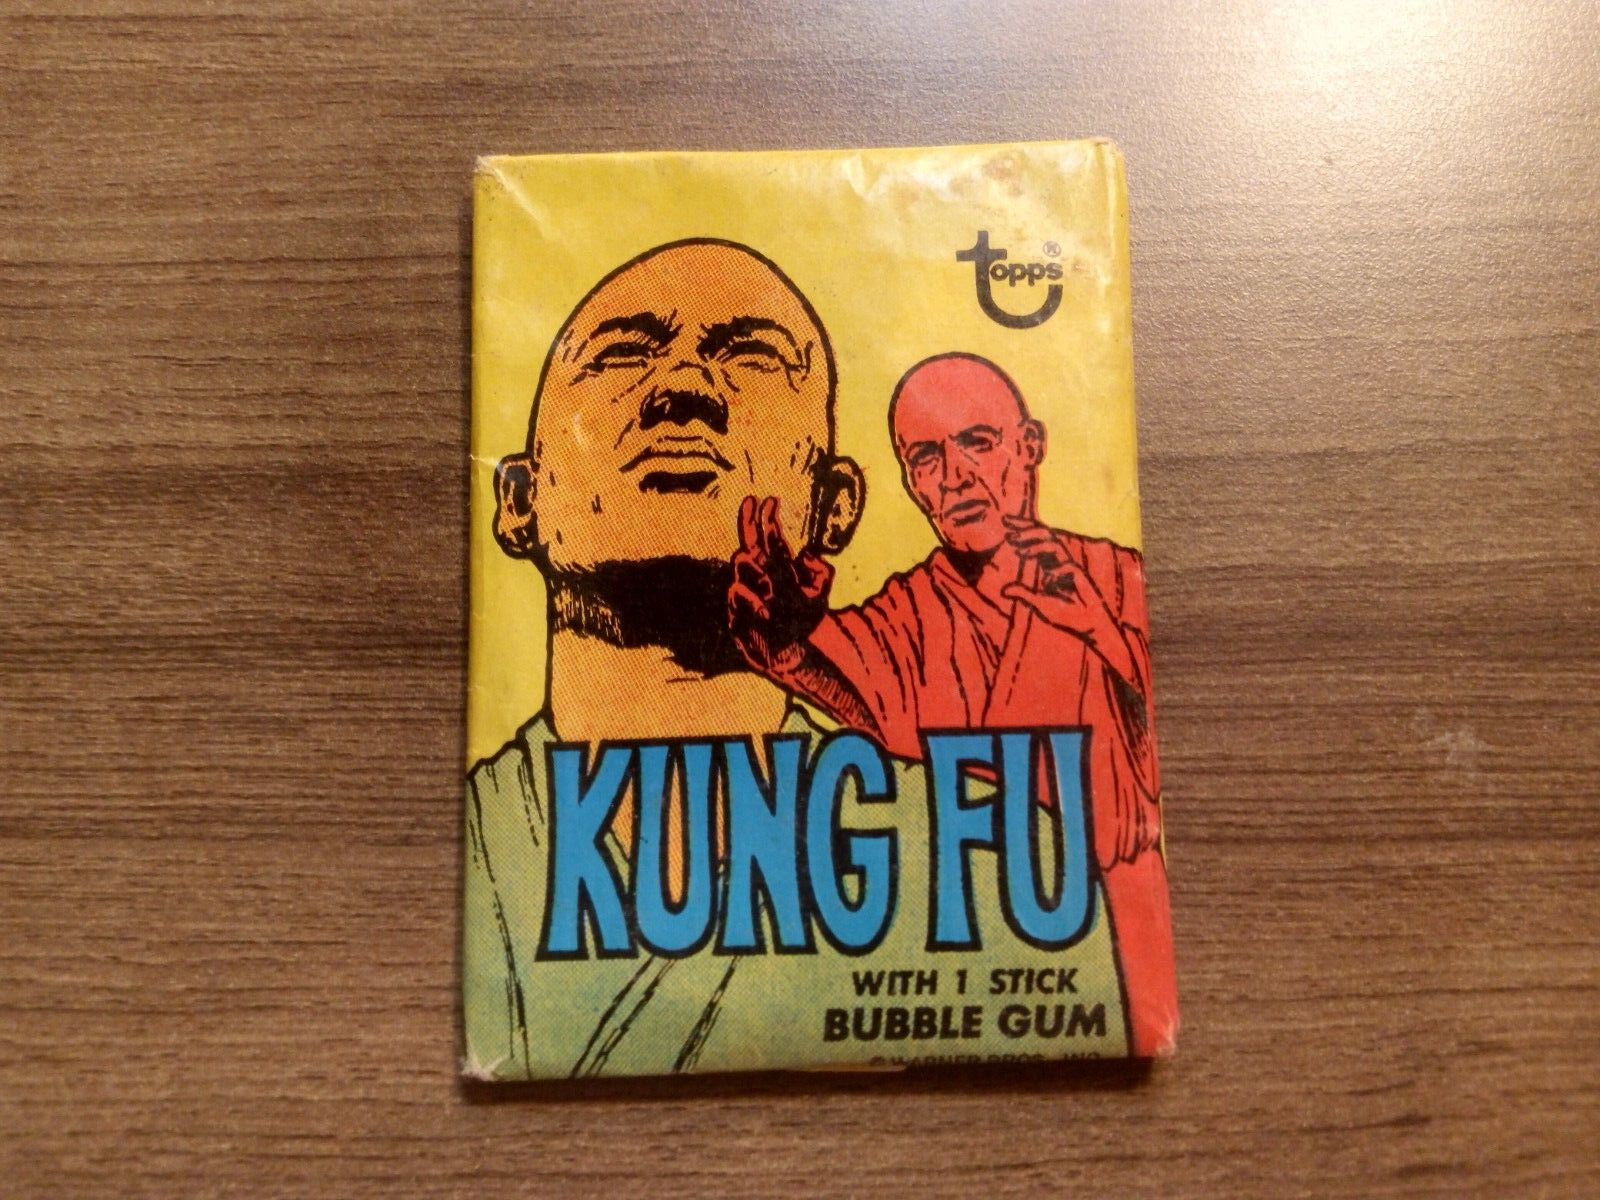 1973 Topps Kung-Fu TV SHOW Vintage Wax Pack Card Unopened David Carradine